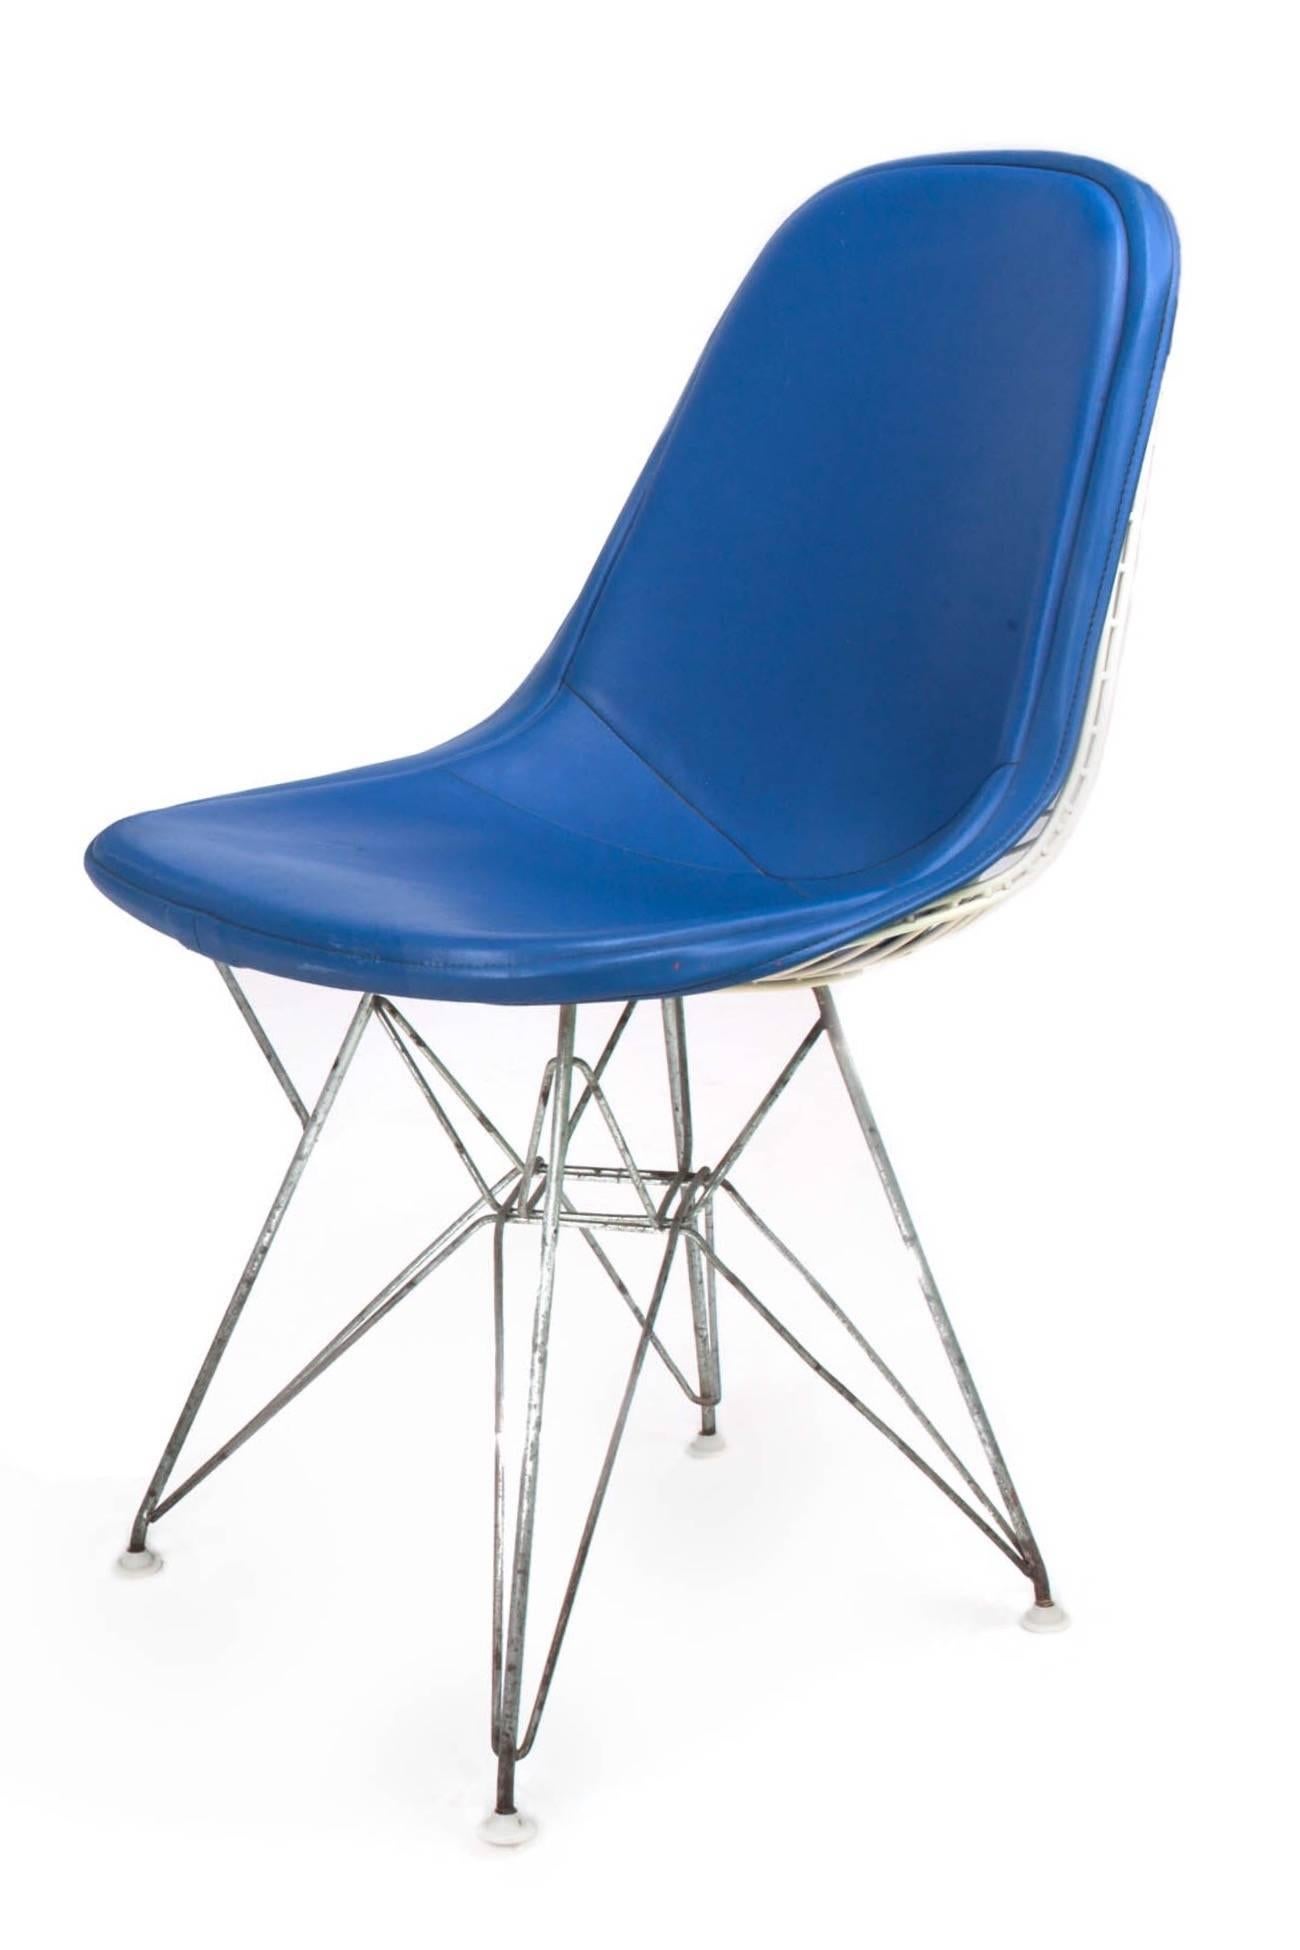 Enameled Original Set of 4 Eames DKR-1 Dining Chairs in Blue Vinyl and White Steel, 1951 For Sale